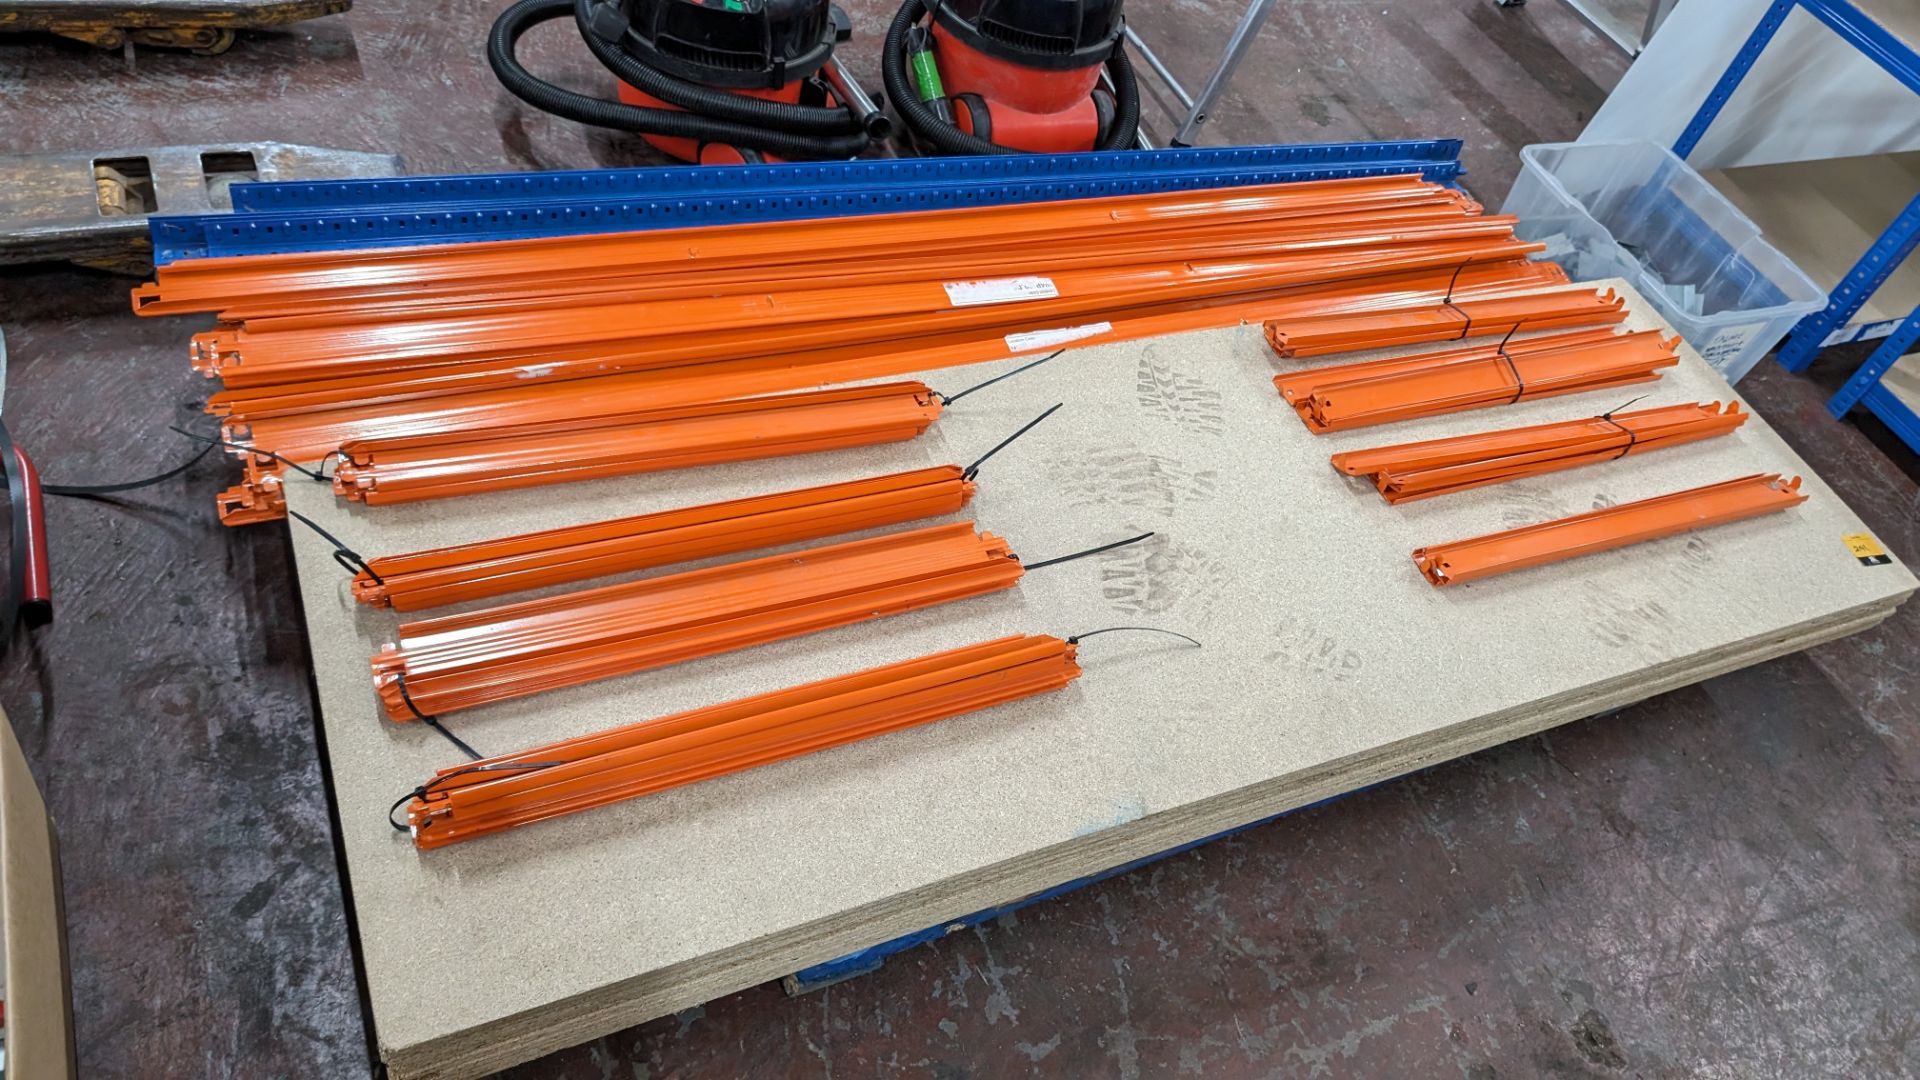 Quantity of orange & blue bolt-free racking comprising 8 uprights each 1,785mm tall, 16 beams each 1